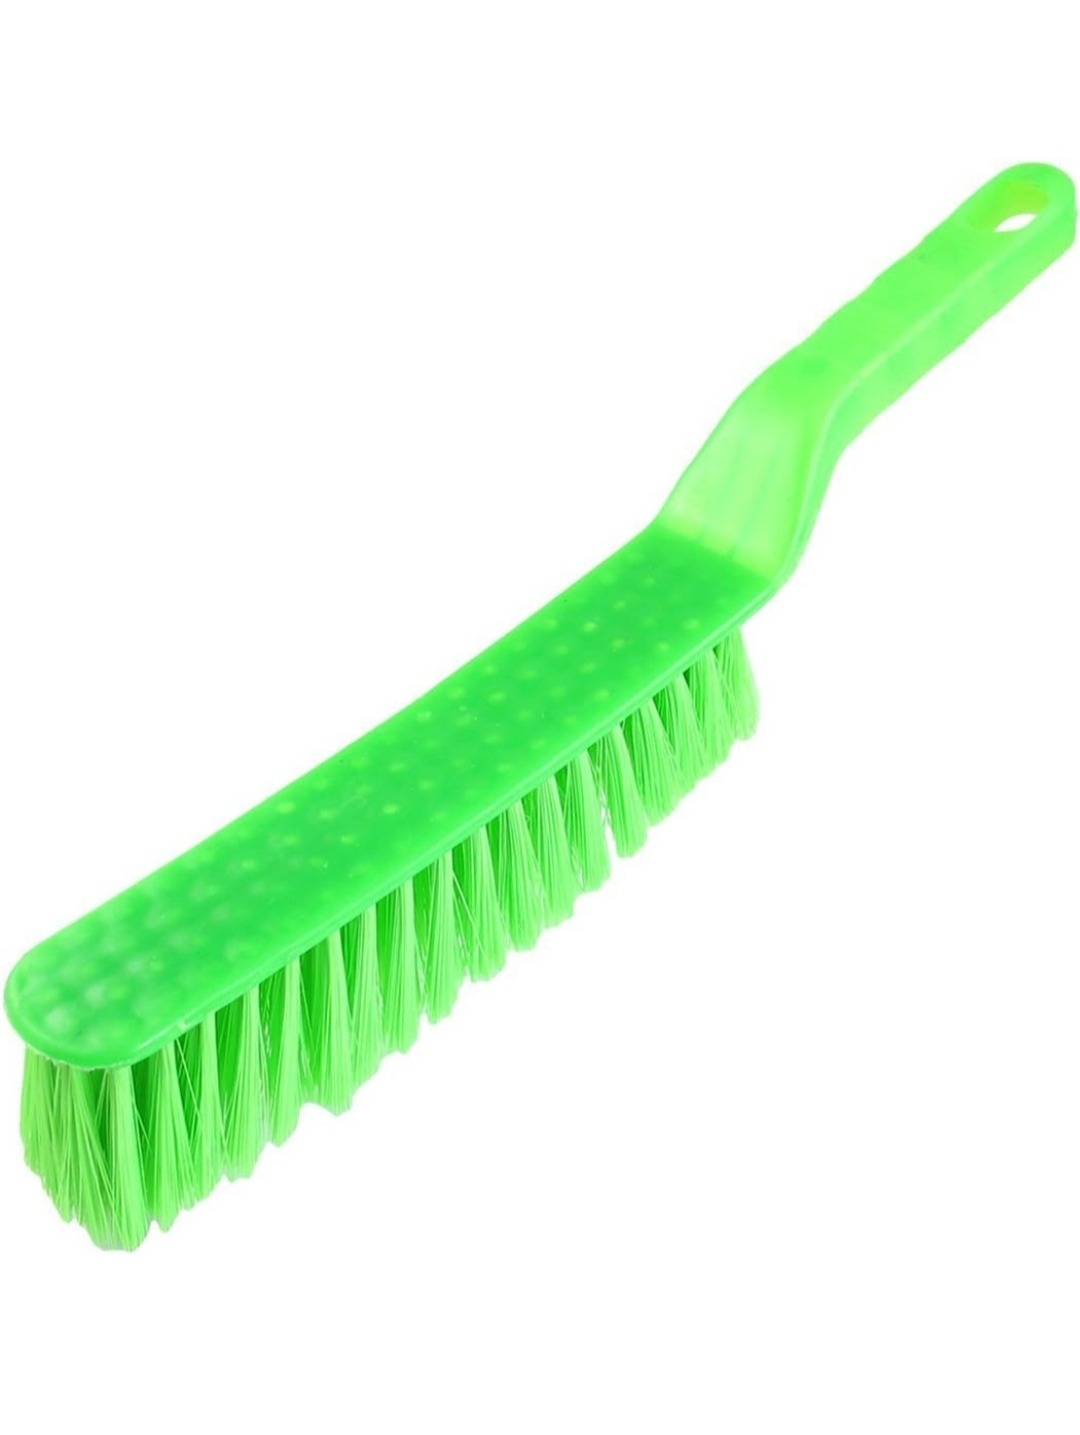 Plastic Long Carpet Cleaning Brush (Any color)